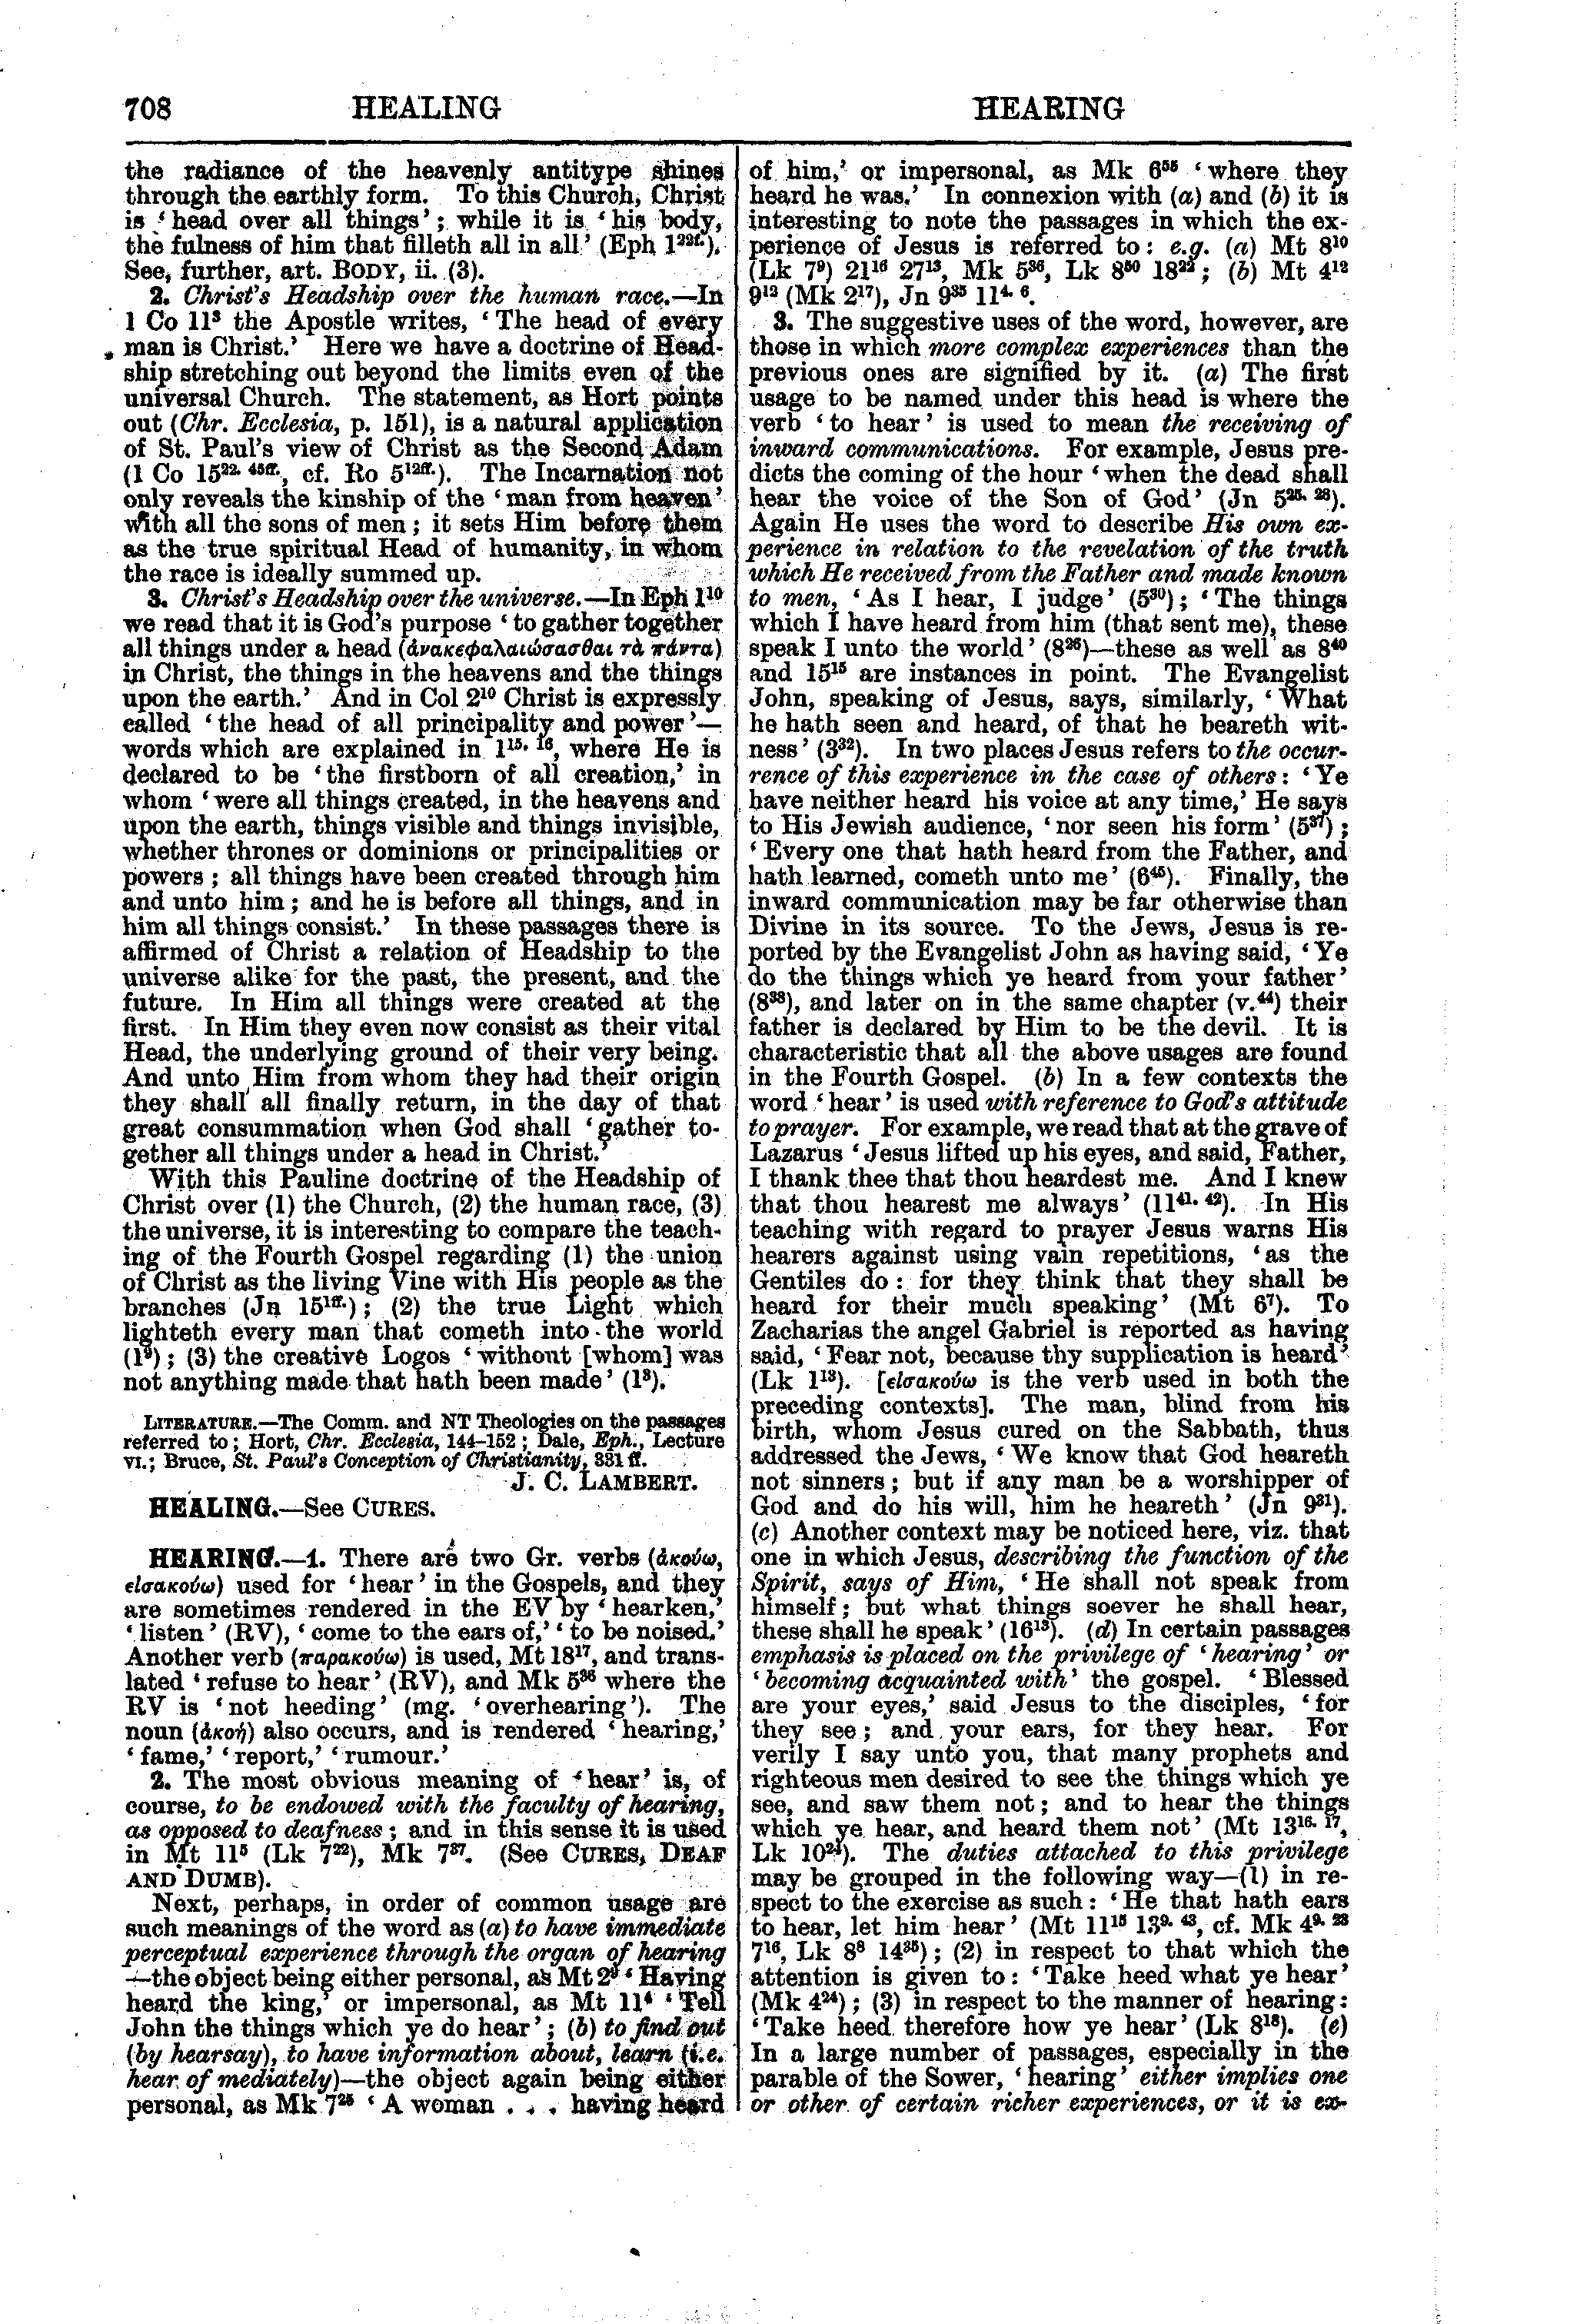 Image of page 708